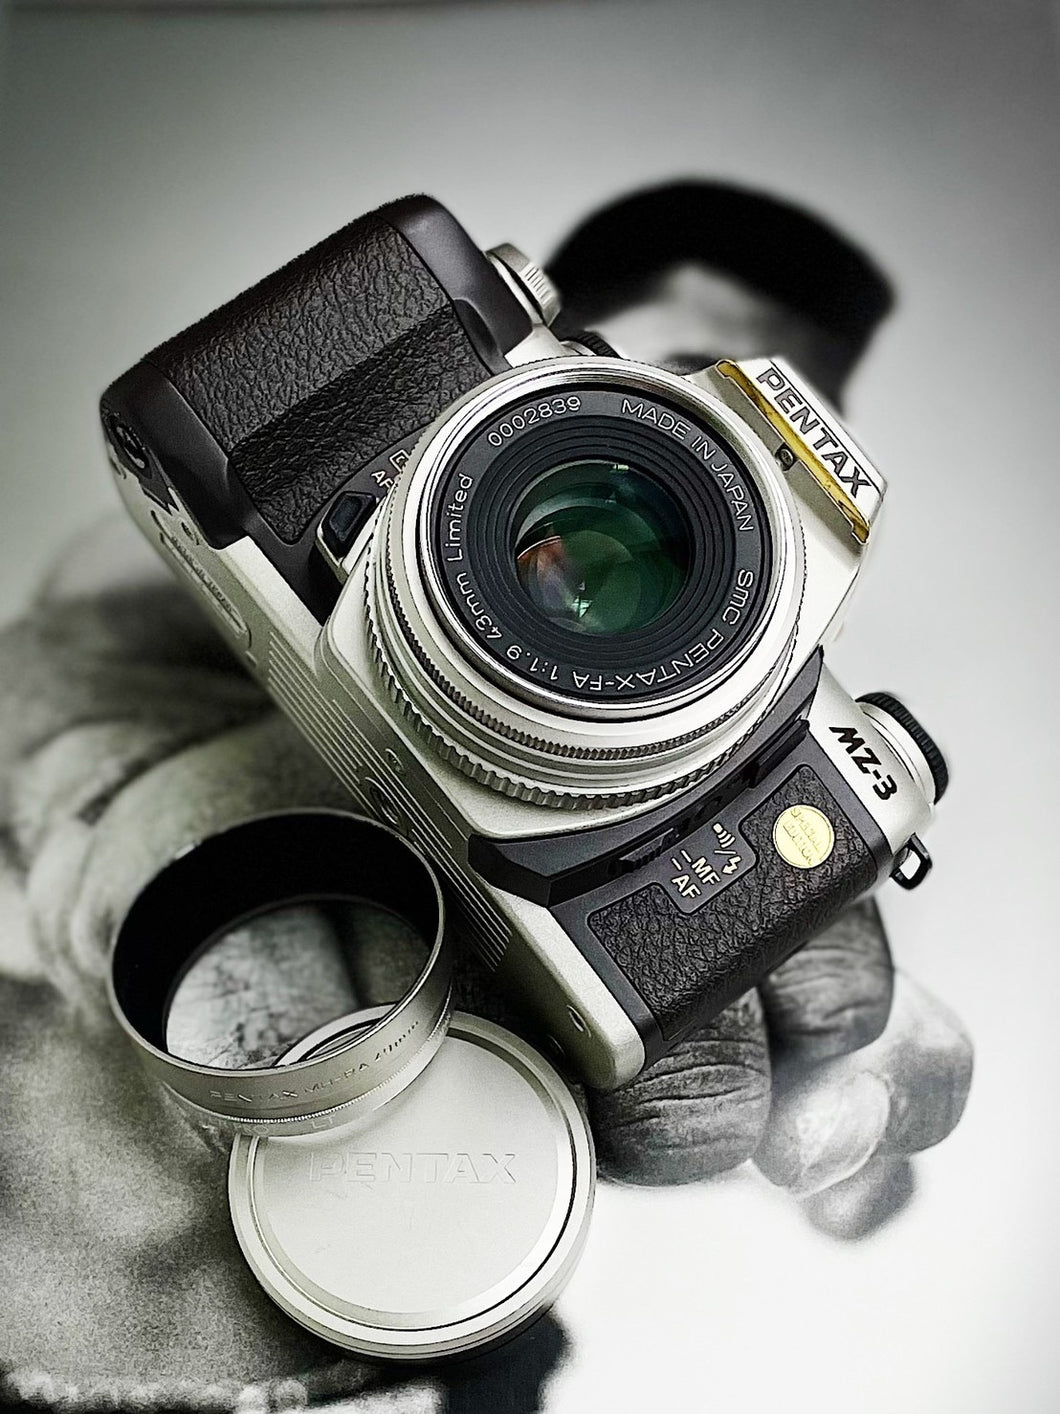 Pentax MZ-3 Special Edition with Lens